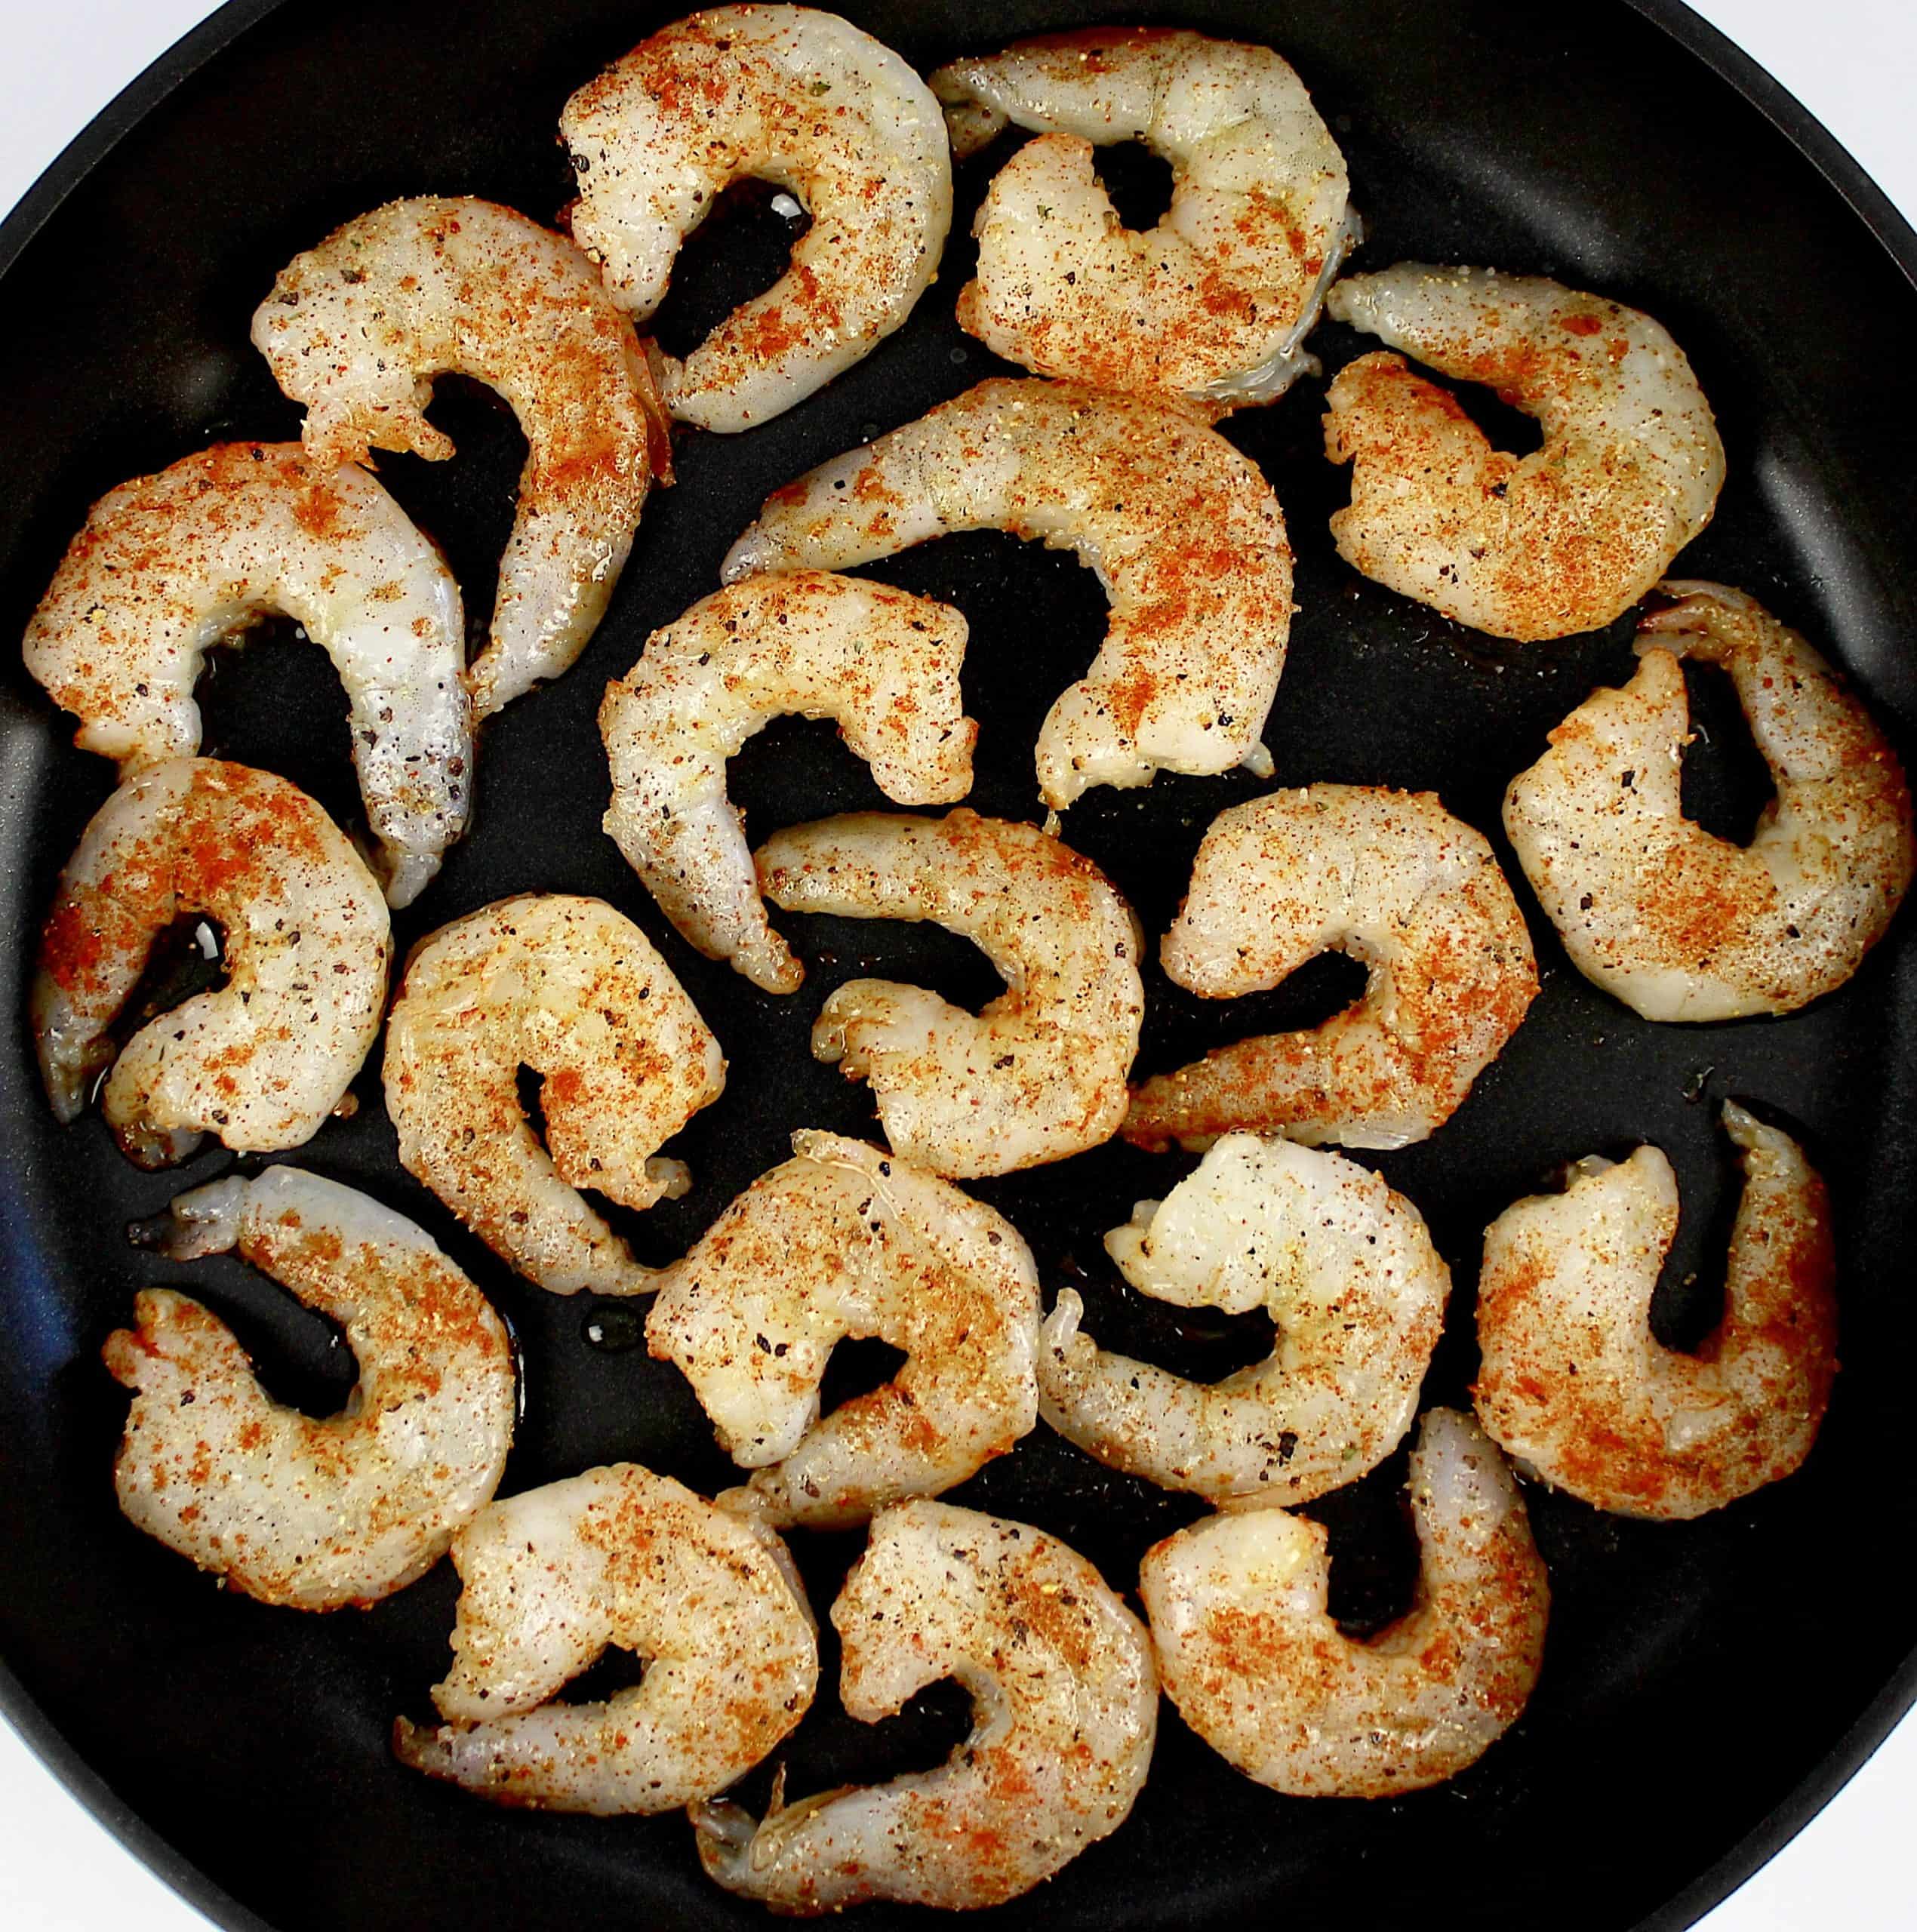 shrimp with spices cooking in skillet